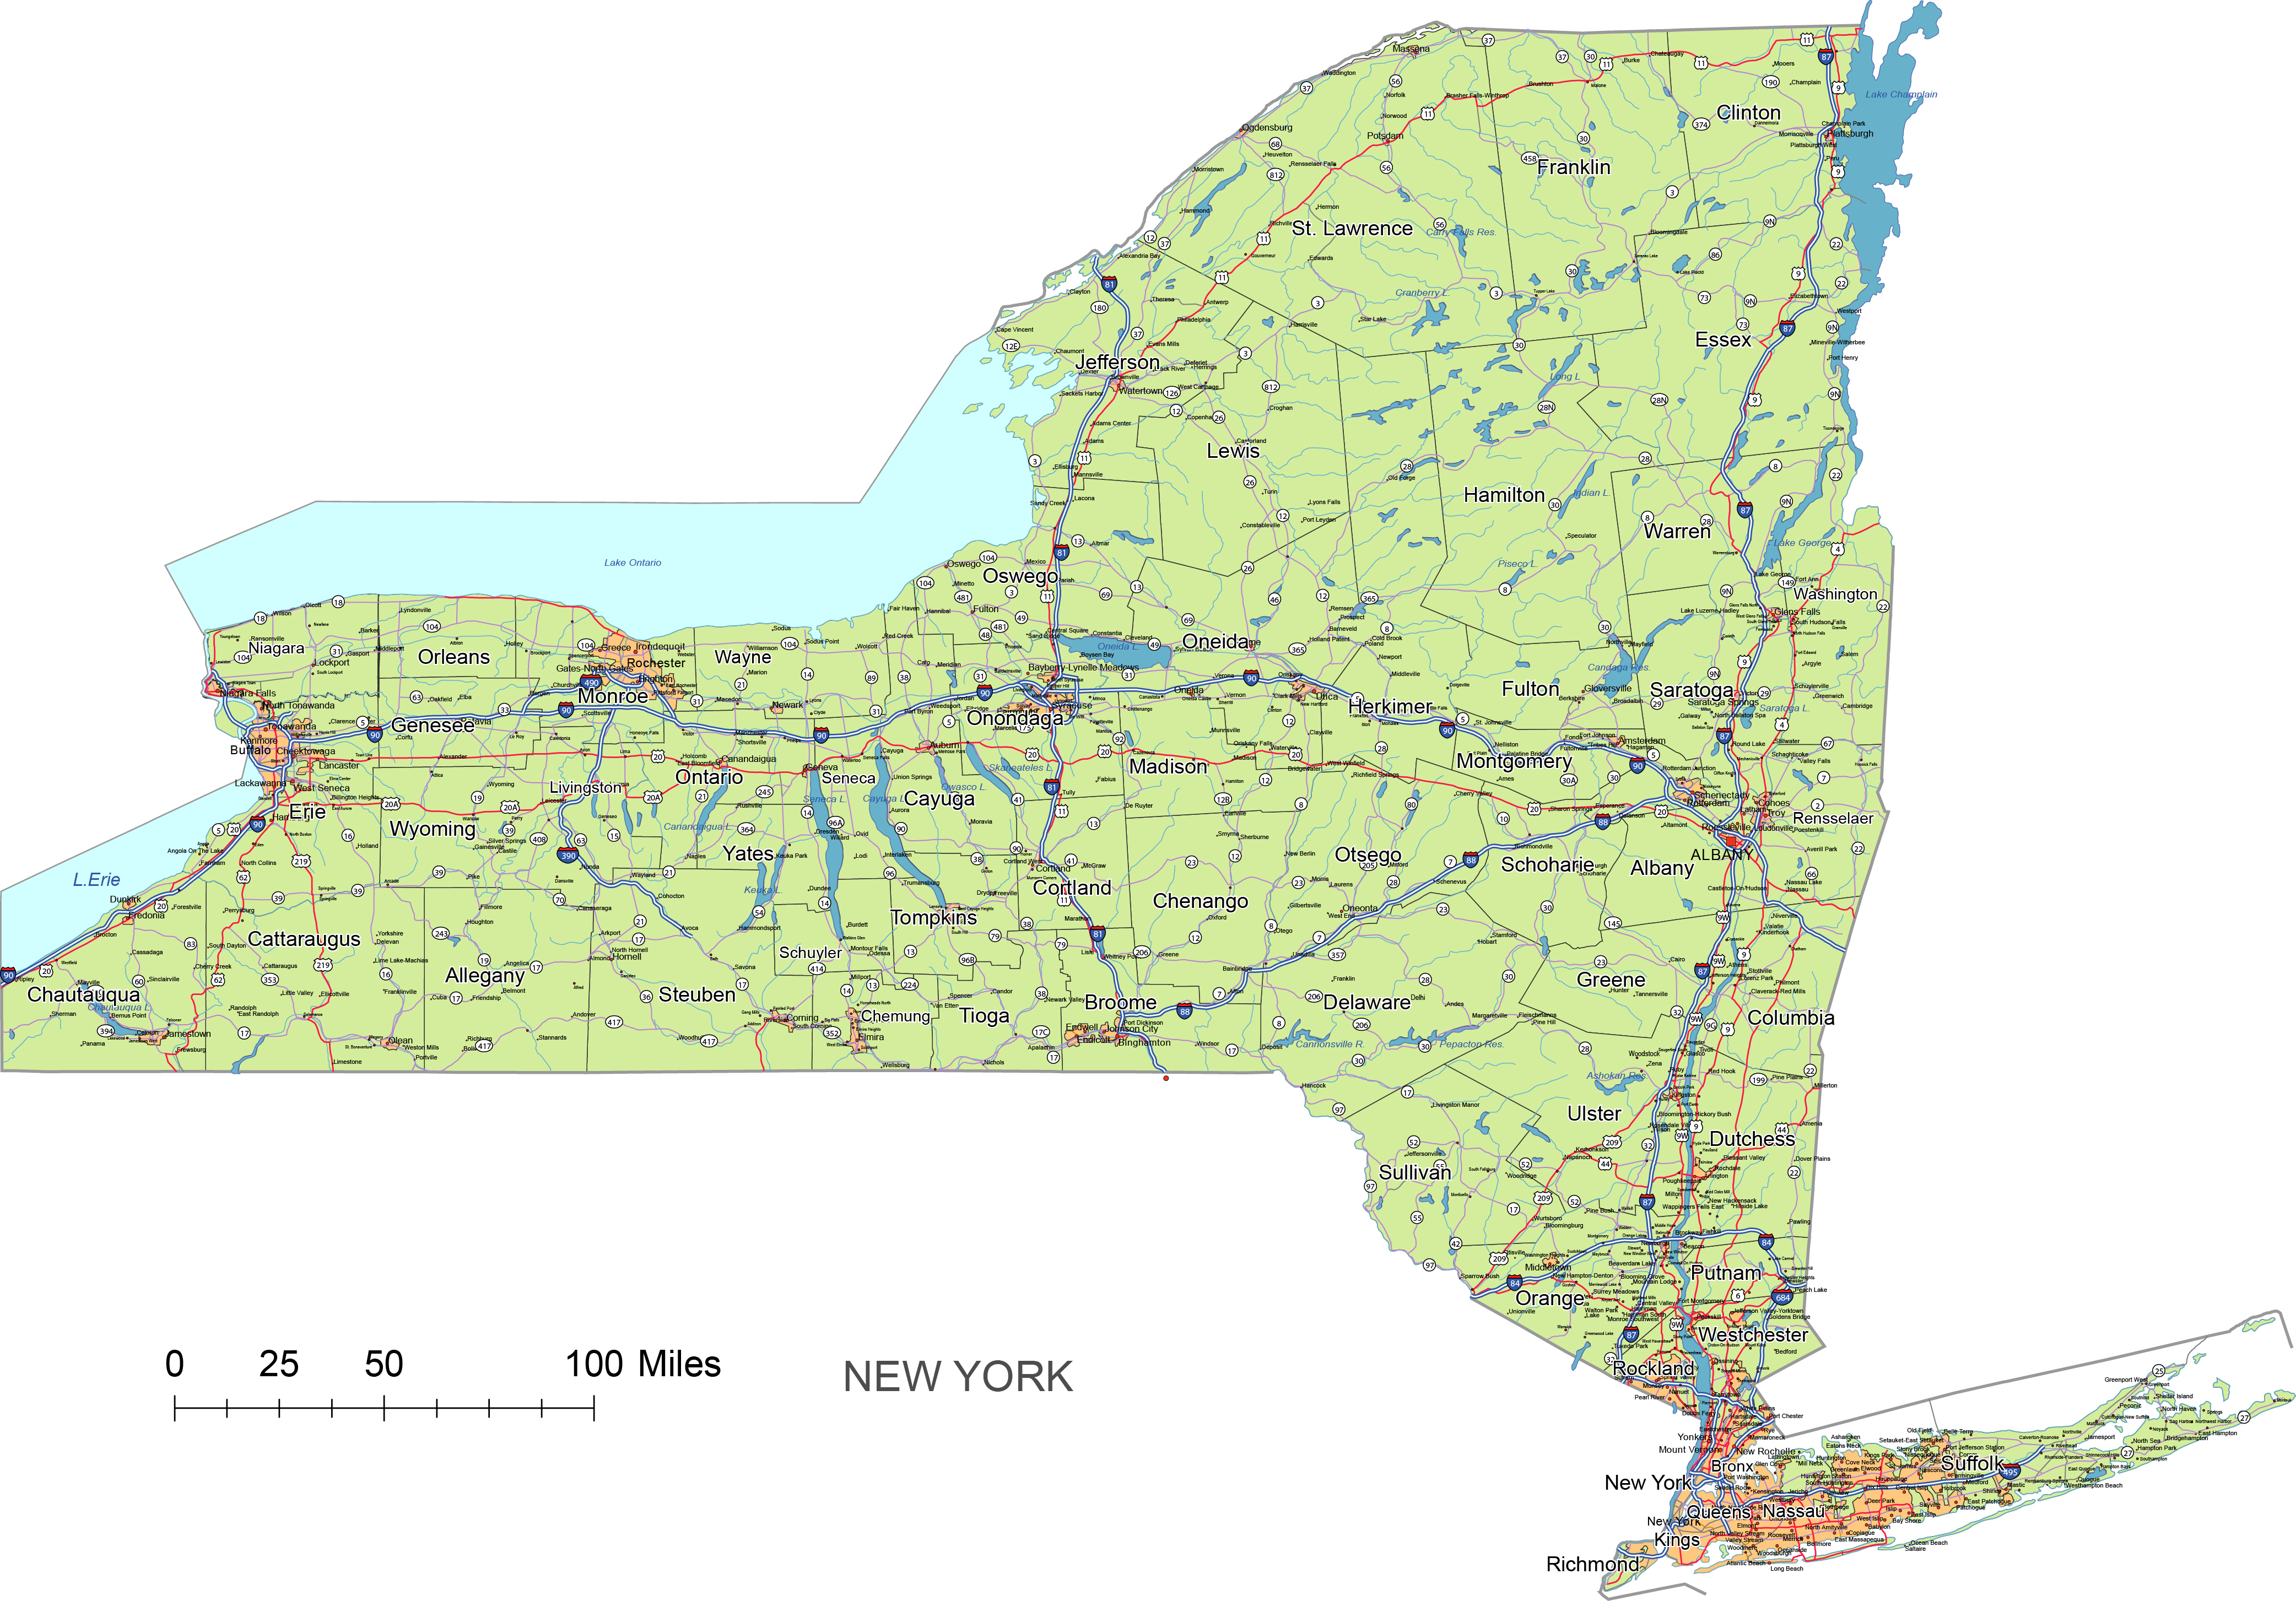 New York State vector road map - Your-Vector-Maps.com